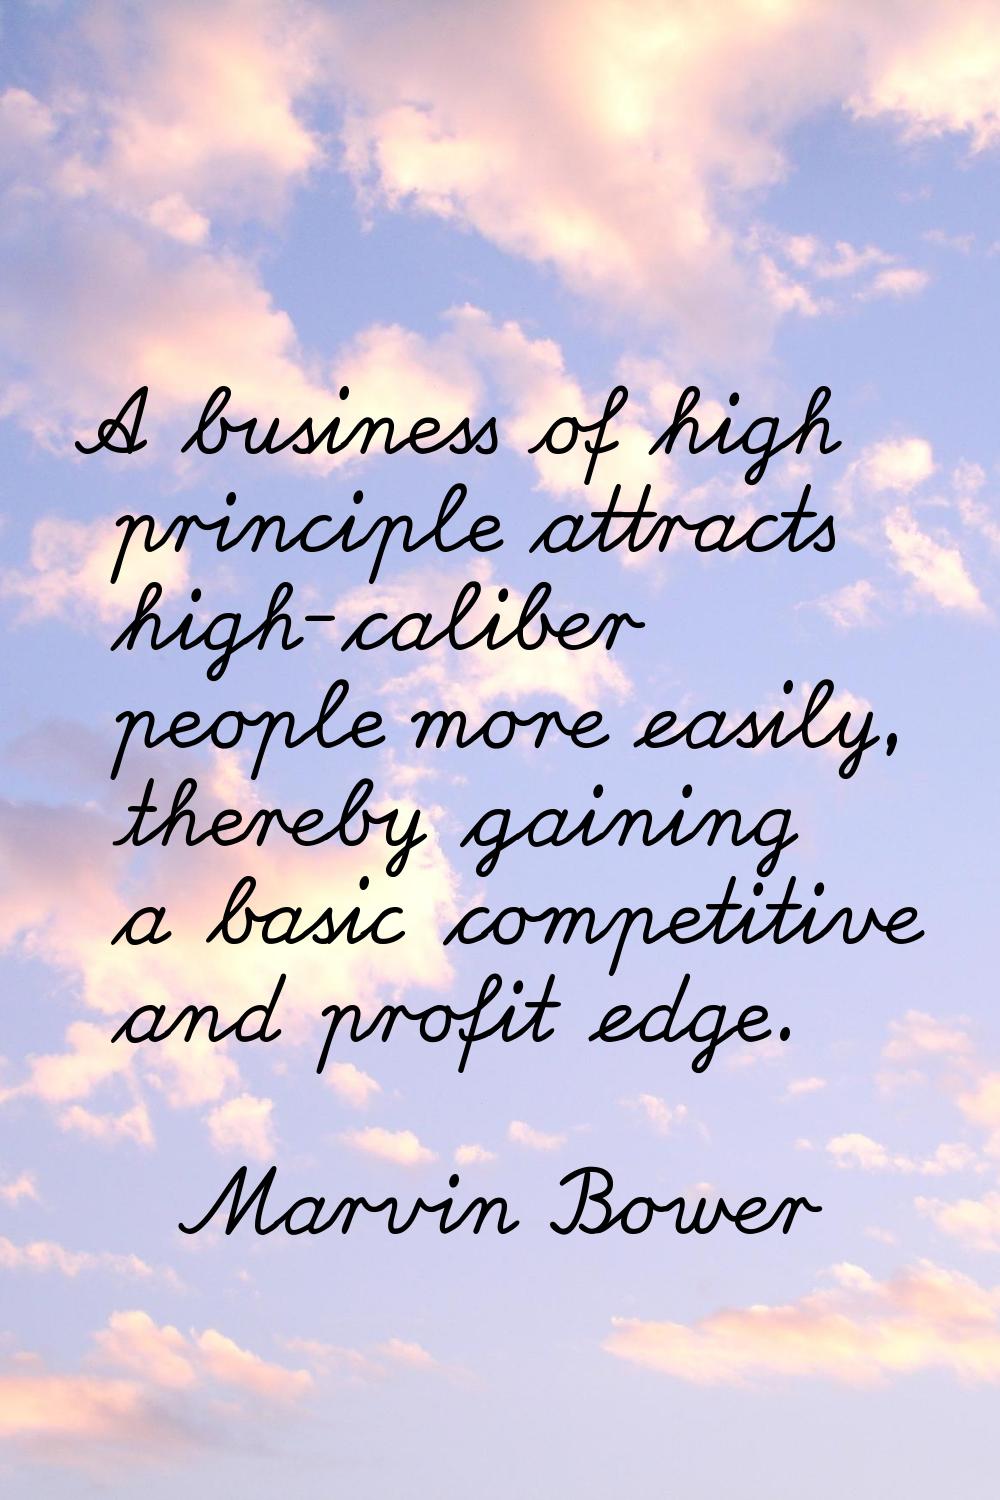 A business of high principle attracts high-caliber people more easily, thereby gaining a basic comp